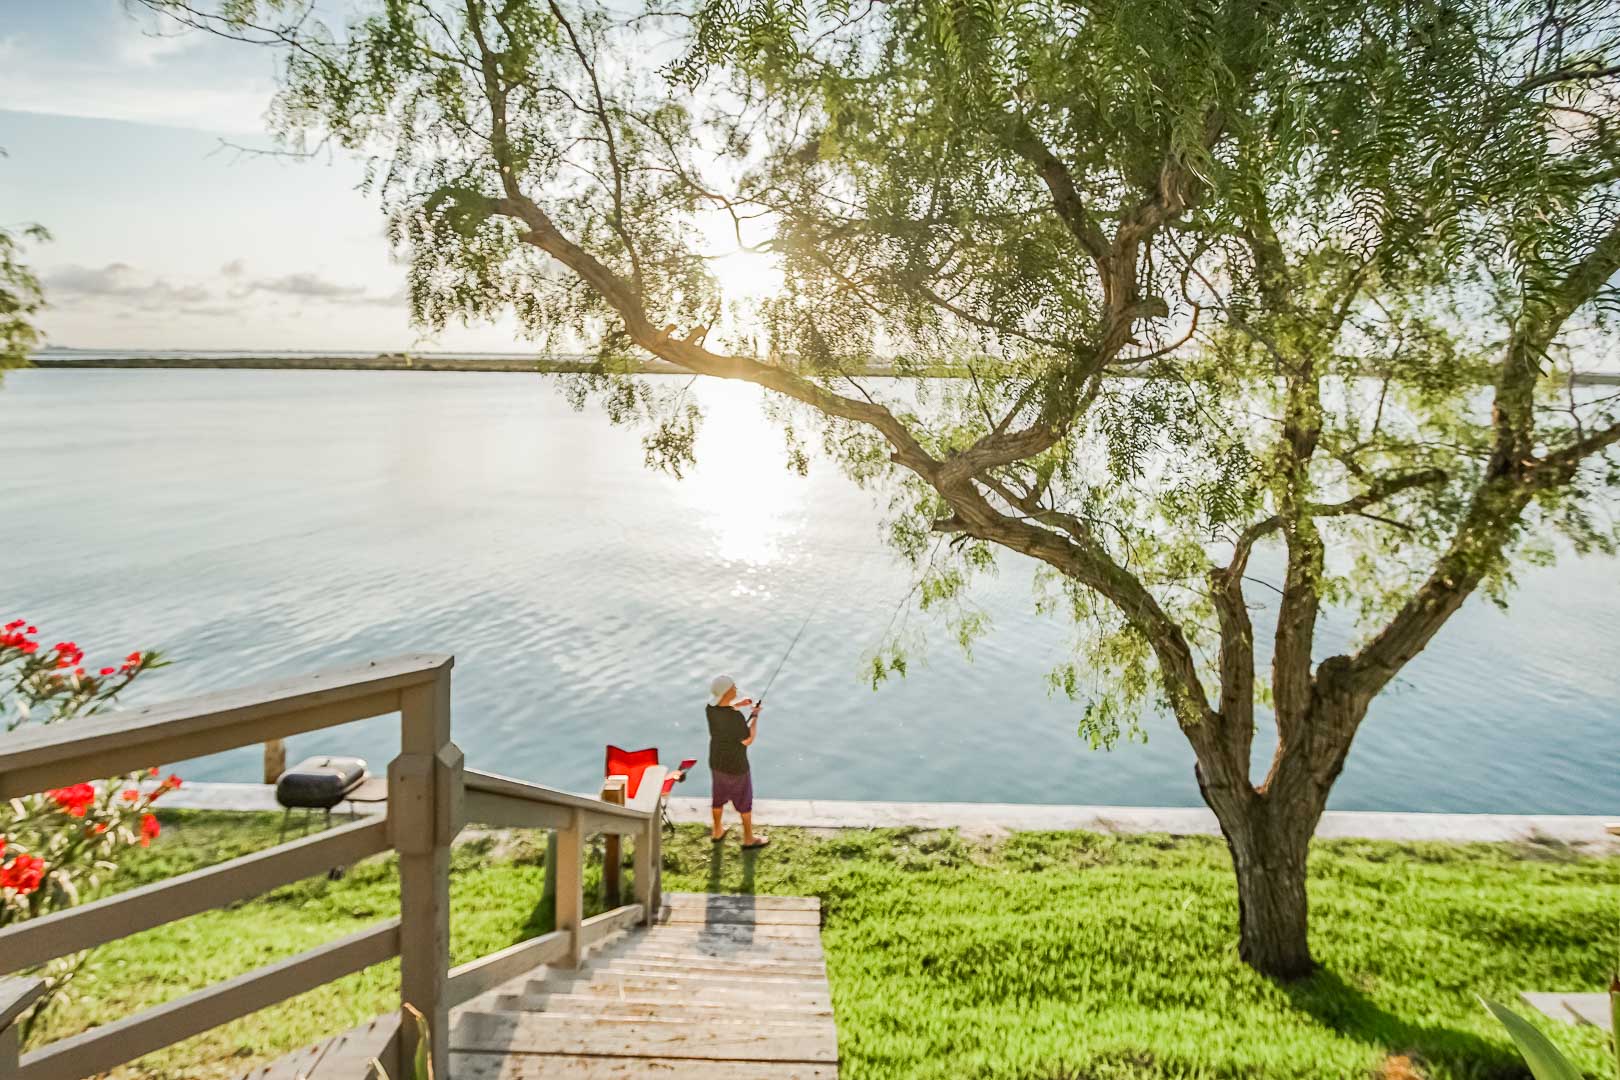 A peaceful lakeside view at VRI's Puente Vista Resort in Texas.